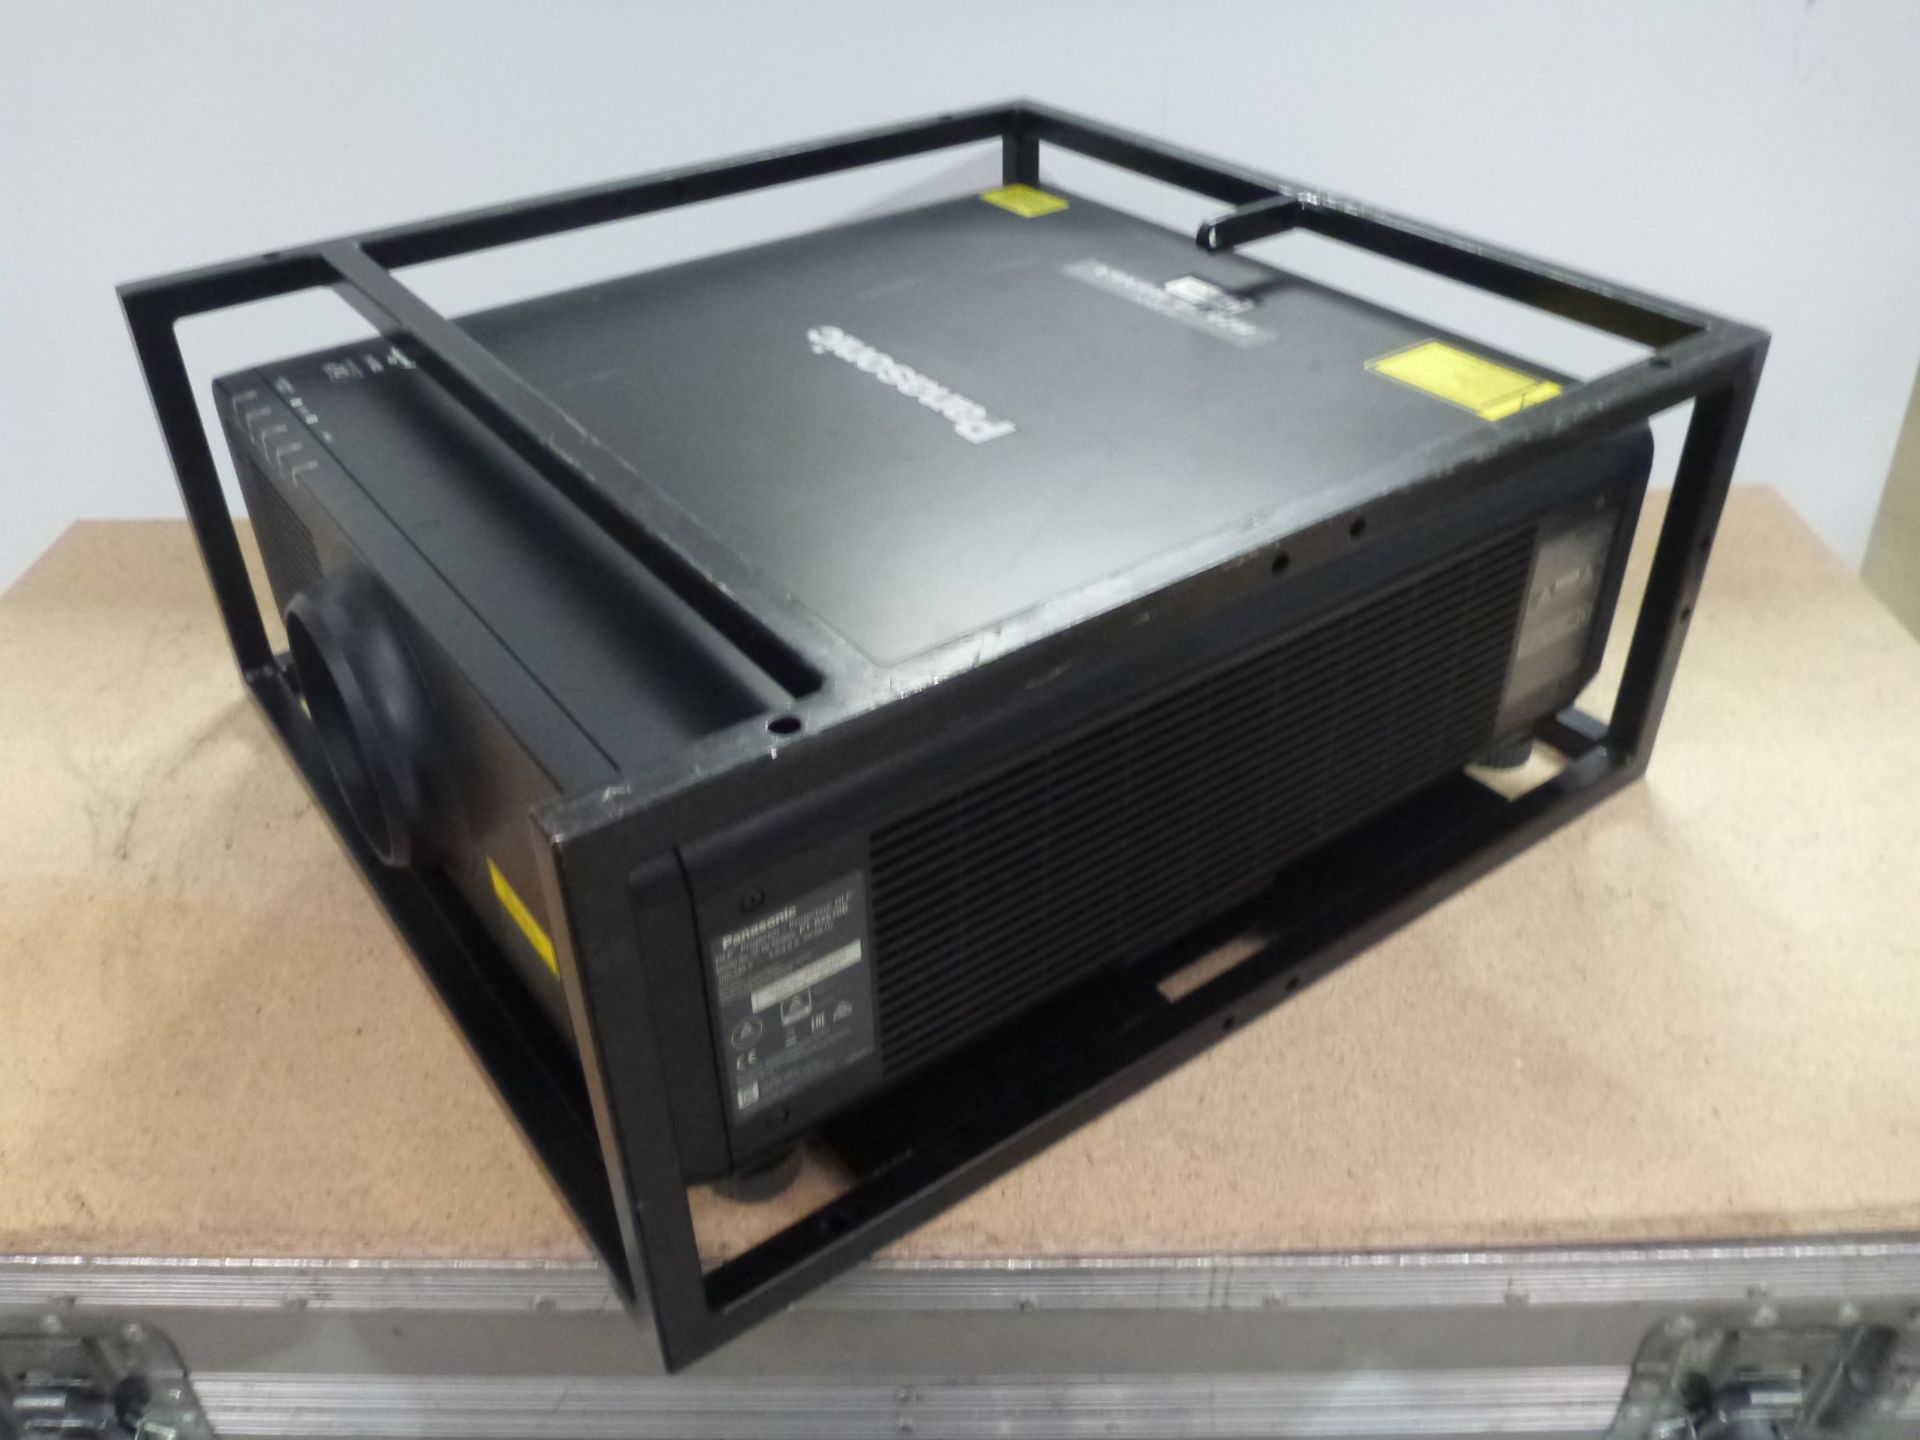 Panasonic Laser Projector, Model PT-RZ670, S/N SH5252006, YOM 2015, In flight case with standard 1. - Image 2 of 12